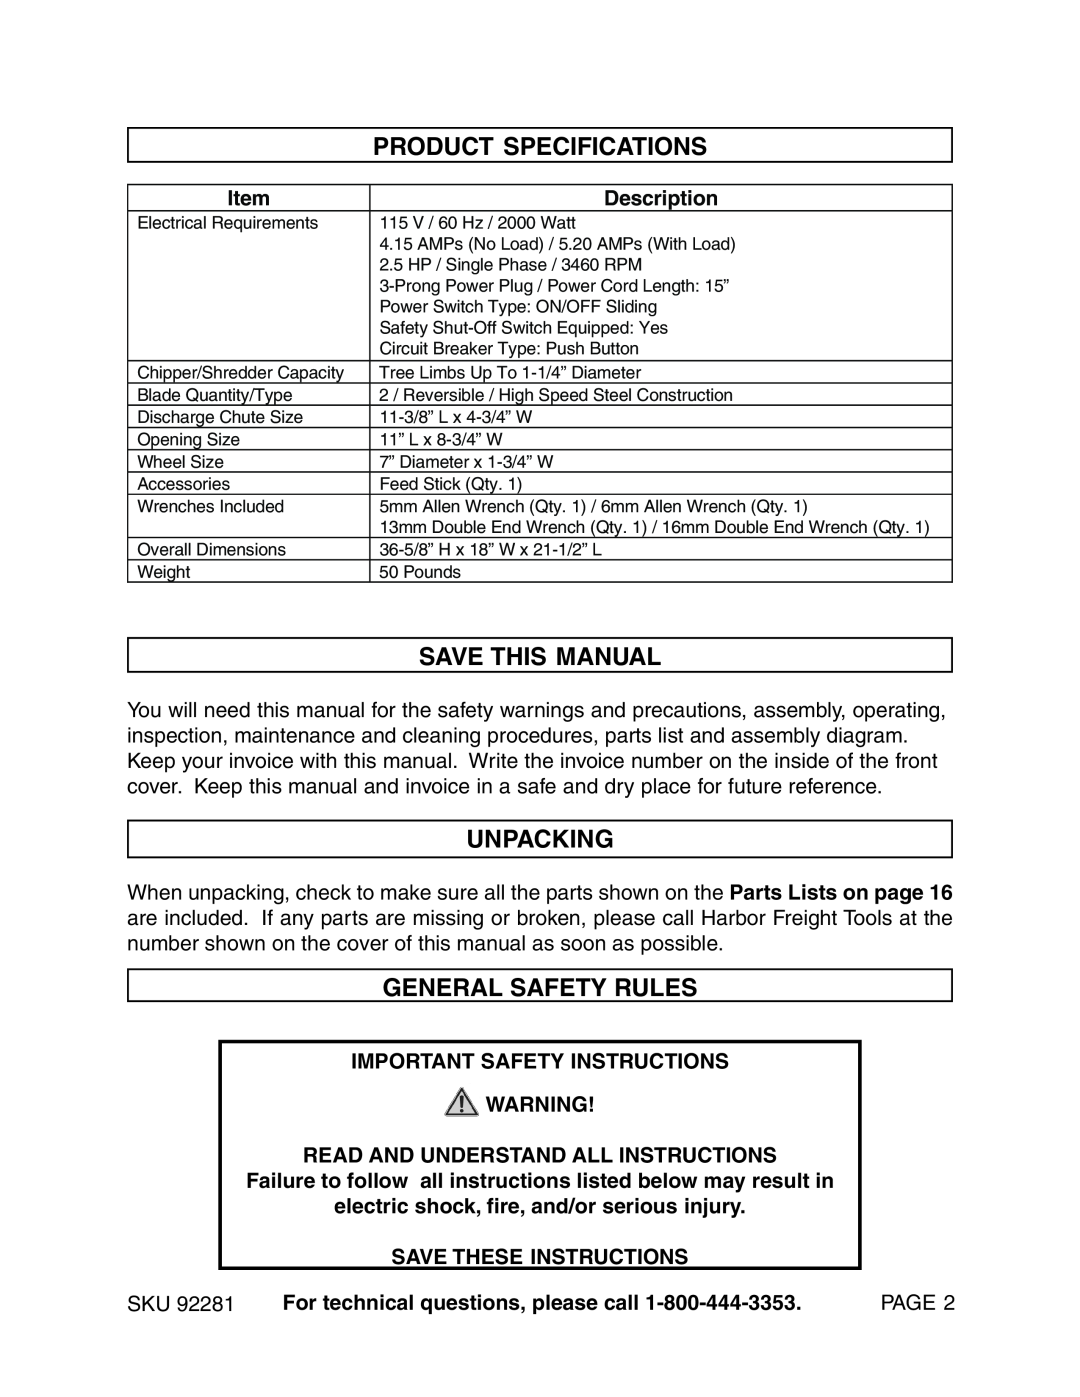 Harbor Freight Tools 92281 manual Product Specifications, Save This Manual, Unpacking, General Safety Rules, Description 